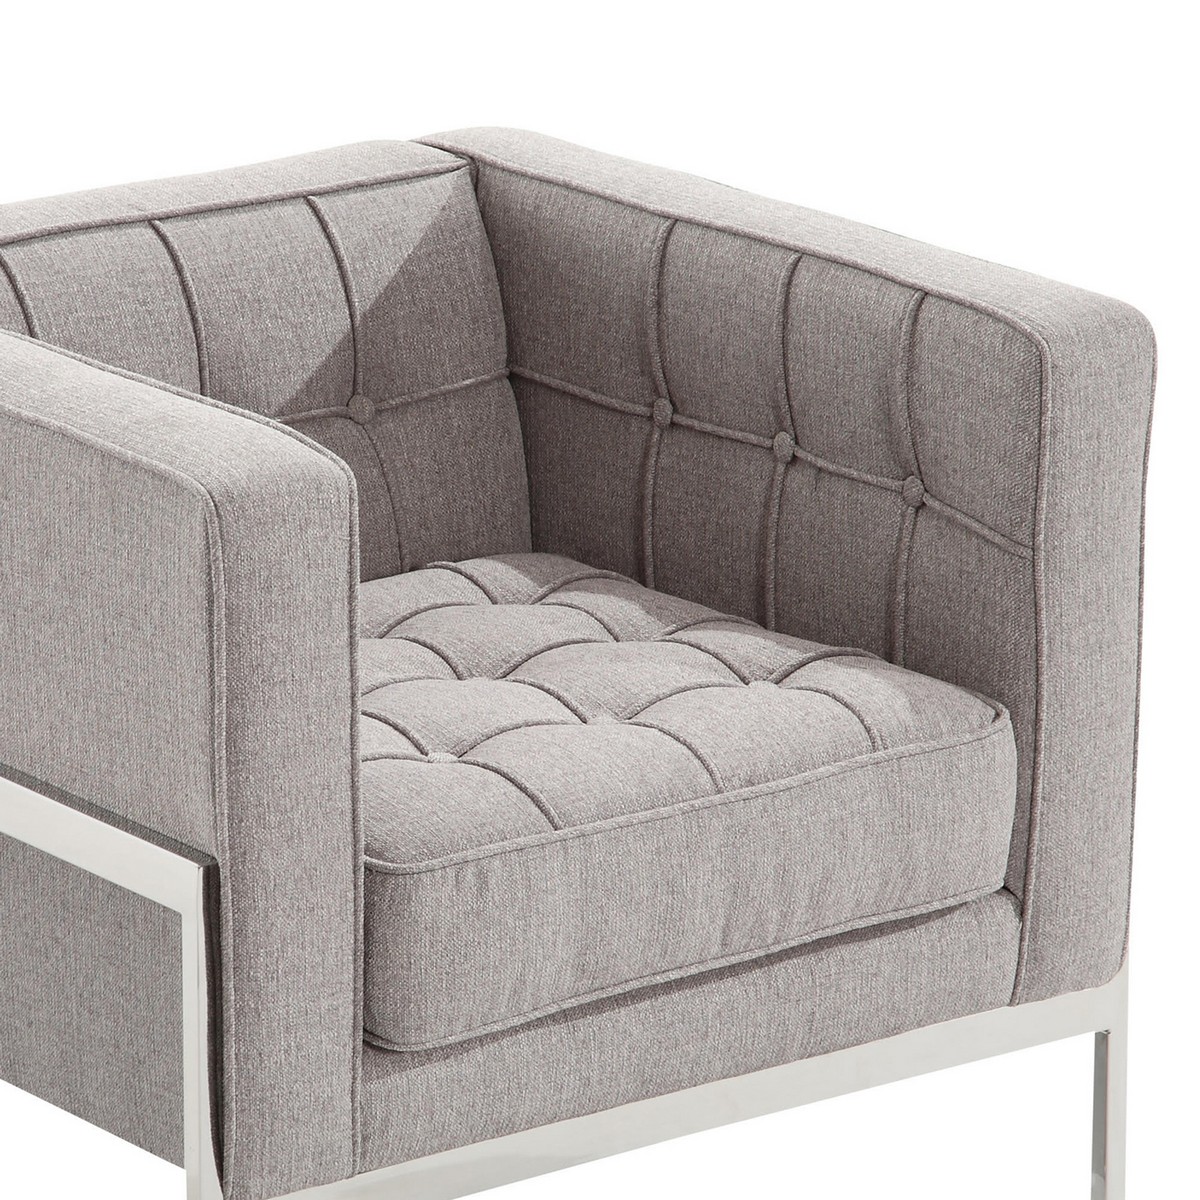 Armen Living Andre Contemporary Chair In Gray Tweed and Stainless Steel